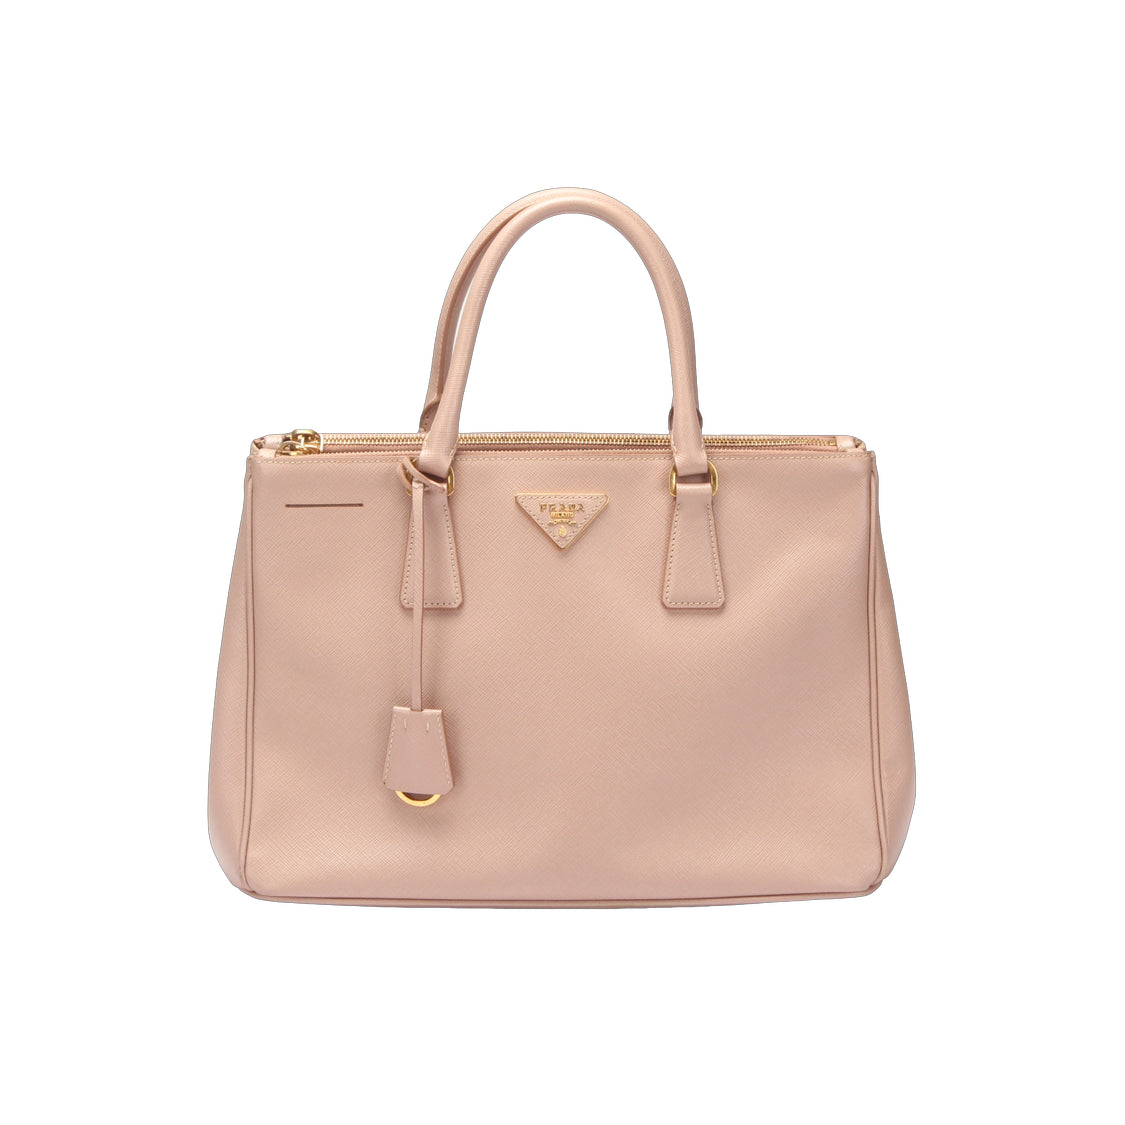 Prada Saffiano Leather Totes: A Timeless Triumph in Luxury – LuxUness